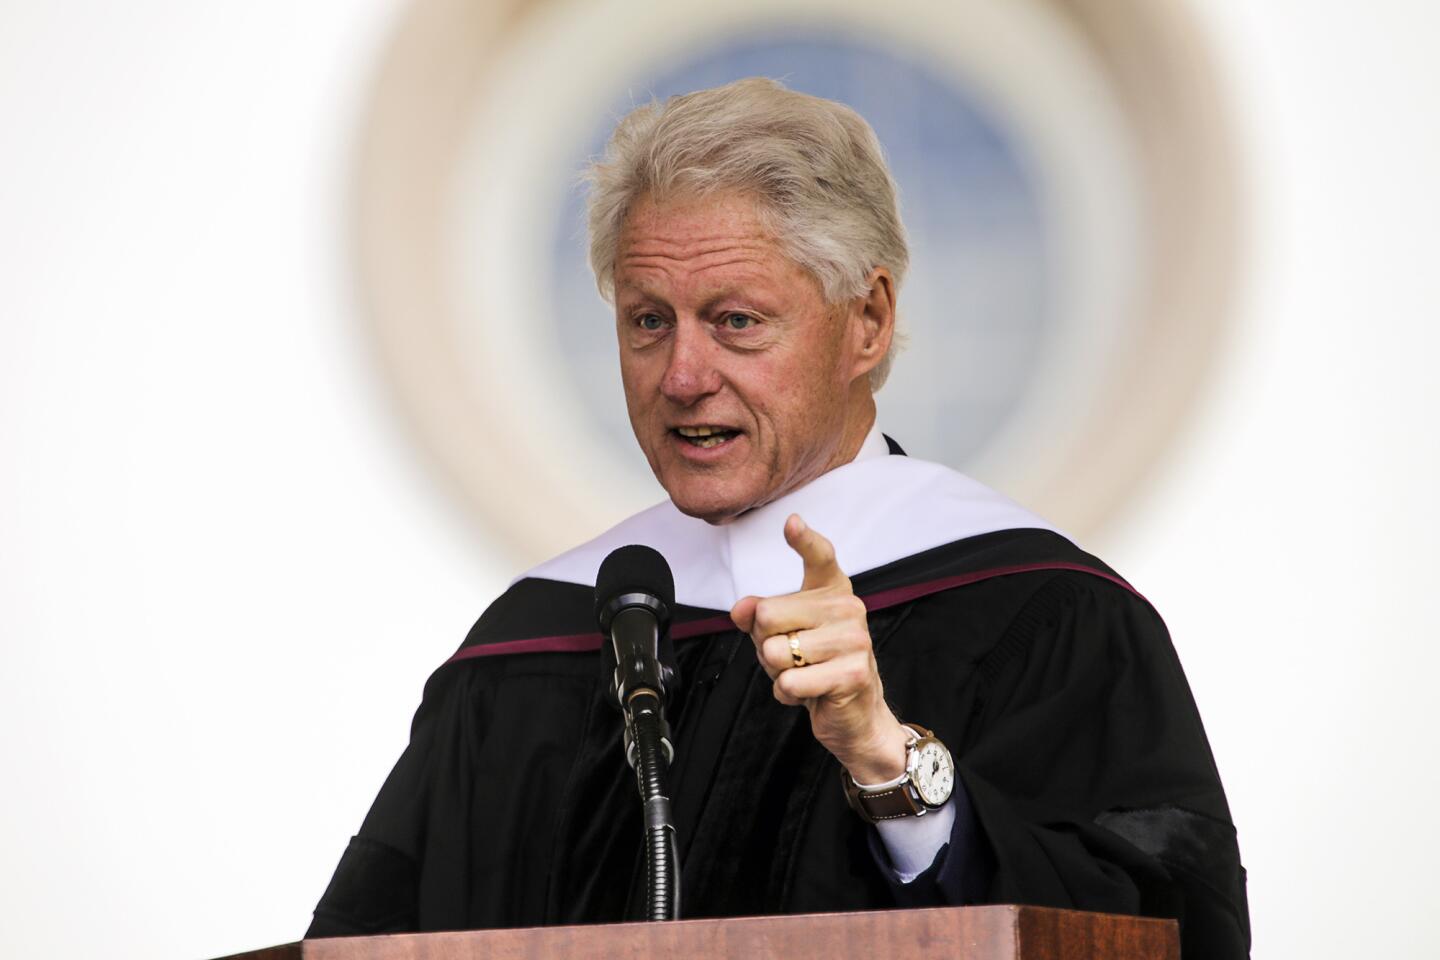 Former President Bill Clinton delivers the commencement address at Loyola Marymount University on Saturday.